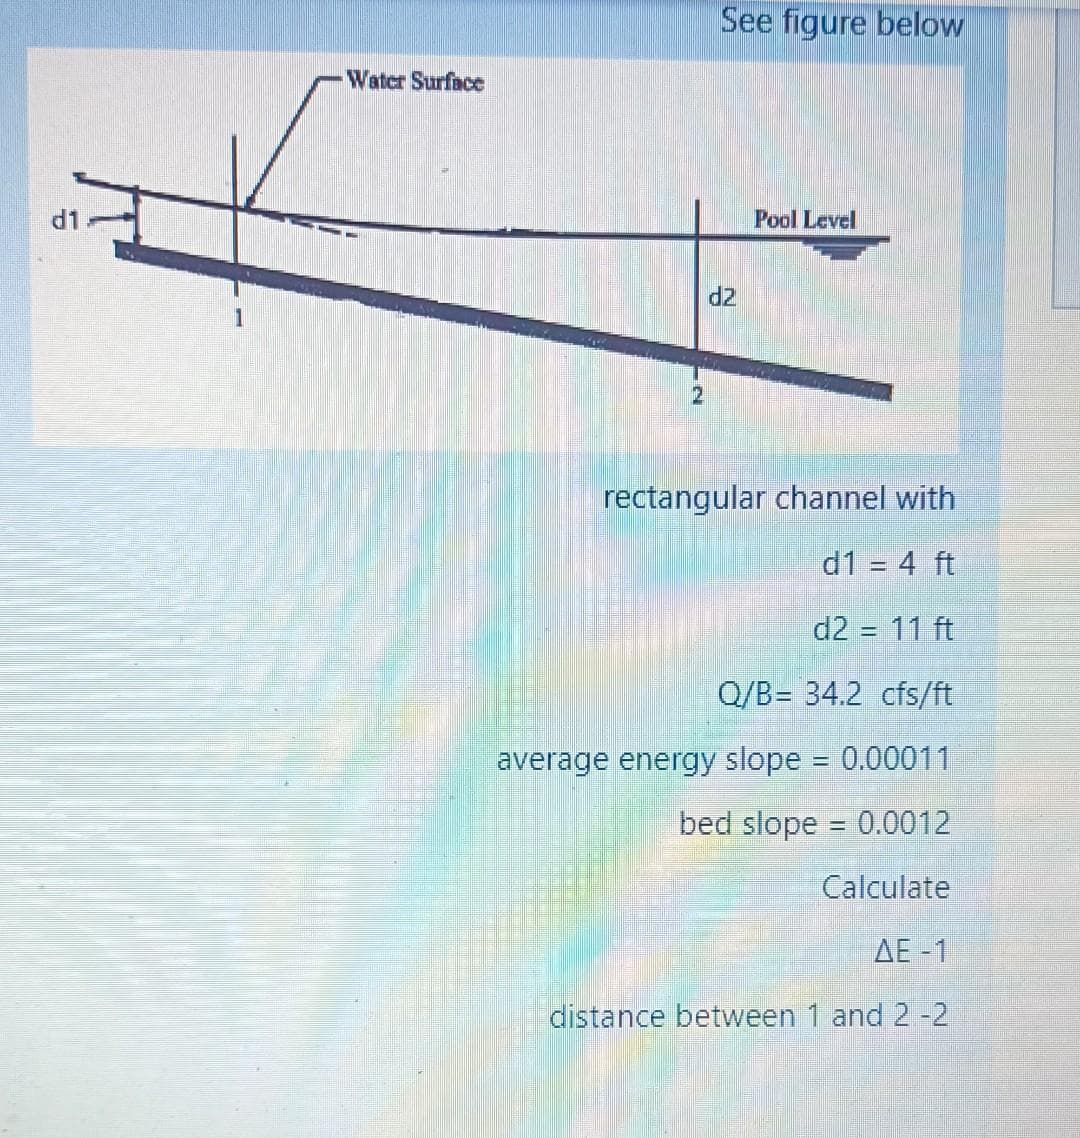 d1
Water Surface
See figure below
Pool Level
2
rectangular channel with
d1 = 4 ft
d2 = 11 ft
Q/B= 34.2 cfs/ft
average energy slope = 0.00011
bed slope = 0.0012
Calculate
AE -1
distance between 1 and 2 -2
d2